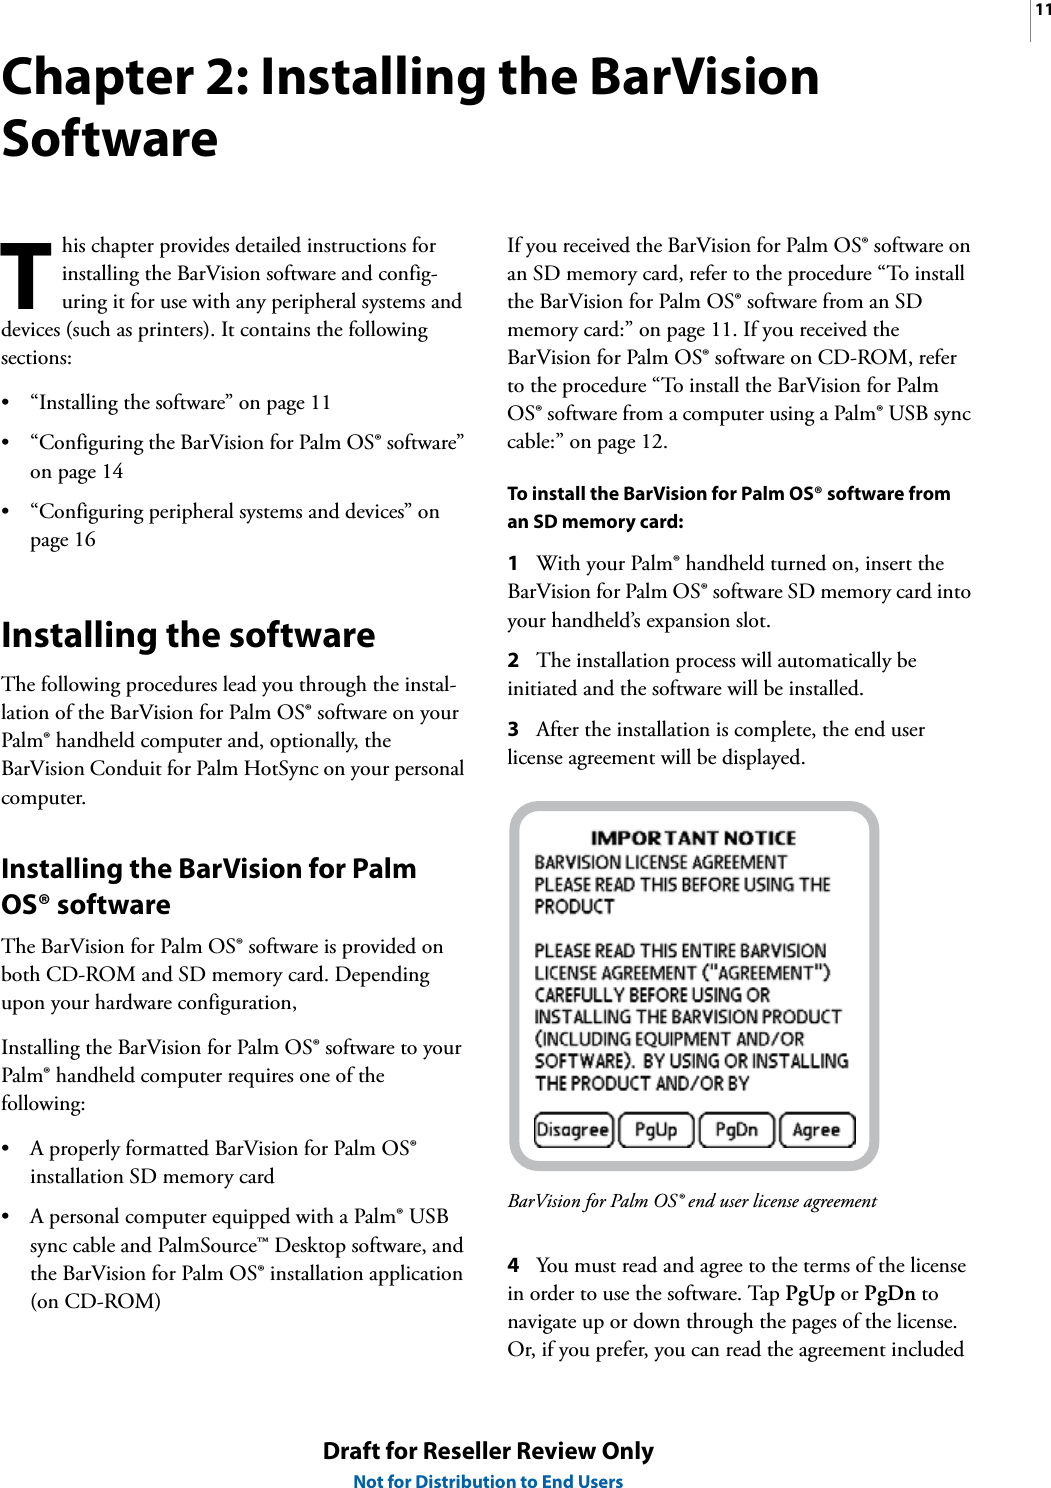 11Draft for Reseller Review OnlyNot for Distribution to End UsersChapter 2: Installing the BarVision Softwarehis chapter provides detailed instructions for installing the BarVision software and config-uring it for use with any peripheral systems and devices (such as printers). It contains the following sections:• “Installing the software” on page 11• “Configuring the BarVision for Palm OS® software” on page 14• “Configuring peripheral systems and devices” on page 16Installing the softwareThe following procedures lead you through the instal-lation of the BarVision for Palm OS® software on your Palm® handheld computer and, optionally, the BarVision Conduit for Palm HotSync on your personal computer.Installing the BarVision for Palm OS® softwareThe BarVision for Palm OS® software is provided on both CD-ROM and SD memory card. Depending upon your hardware configuration, Installing the BarVision for Palm OS® software to your Palm® handheld computer requires one of the following:• A properly formatted BarVision for Palm OS® installation SD memory card• A personal computer equipped with a Palm® USB sync cable and PalmSource™ Desktop software, and the BarVision for Palm OS® installation application (on CD-ROM)If you received the BarVision for Palm OS® software on an SD memory card, refer to the procedure “To install the BarVision for Palm OS® software from an SD memory card:” on page 11. If you received the BarVision for Palm OS® software on CD-ROM, refer to the procedure “To install the BarVision for Palm OS® software from a computer using a Palm® USB sync cable:” on page 12.To install the BarVision for Palm OS® software from an SD memory card:1With your Palm® handheld turned on, insert the BarVision for Palm OS® software SD memory card into your handheld’s expansion slot.2The installation process will automatically be initiated and the software will be installed.3After the installation is complete, the end user license agreement will be displayed.BarVision for Palm OS® end user license agreement4You must read and agree to the terms of the license in order to use the software. Tap PgUp or PgDn to navigate up or down through the pages of the license. Or, if you prefer, you can read the agreement included T